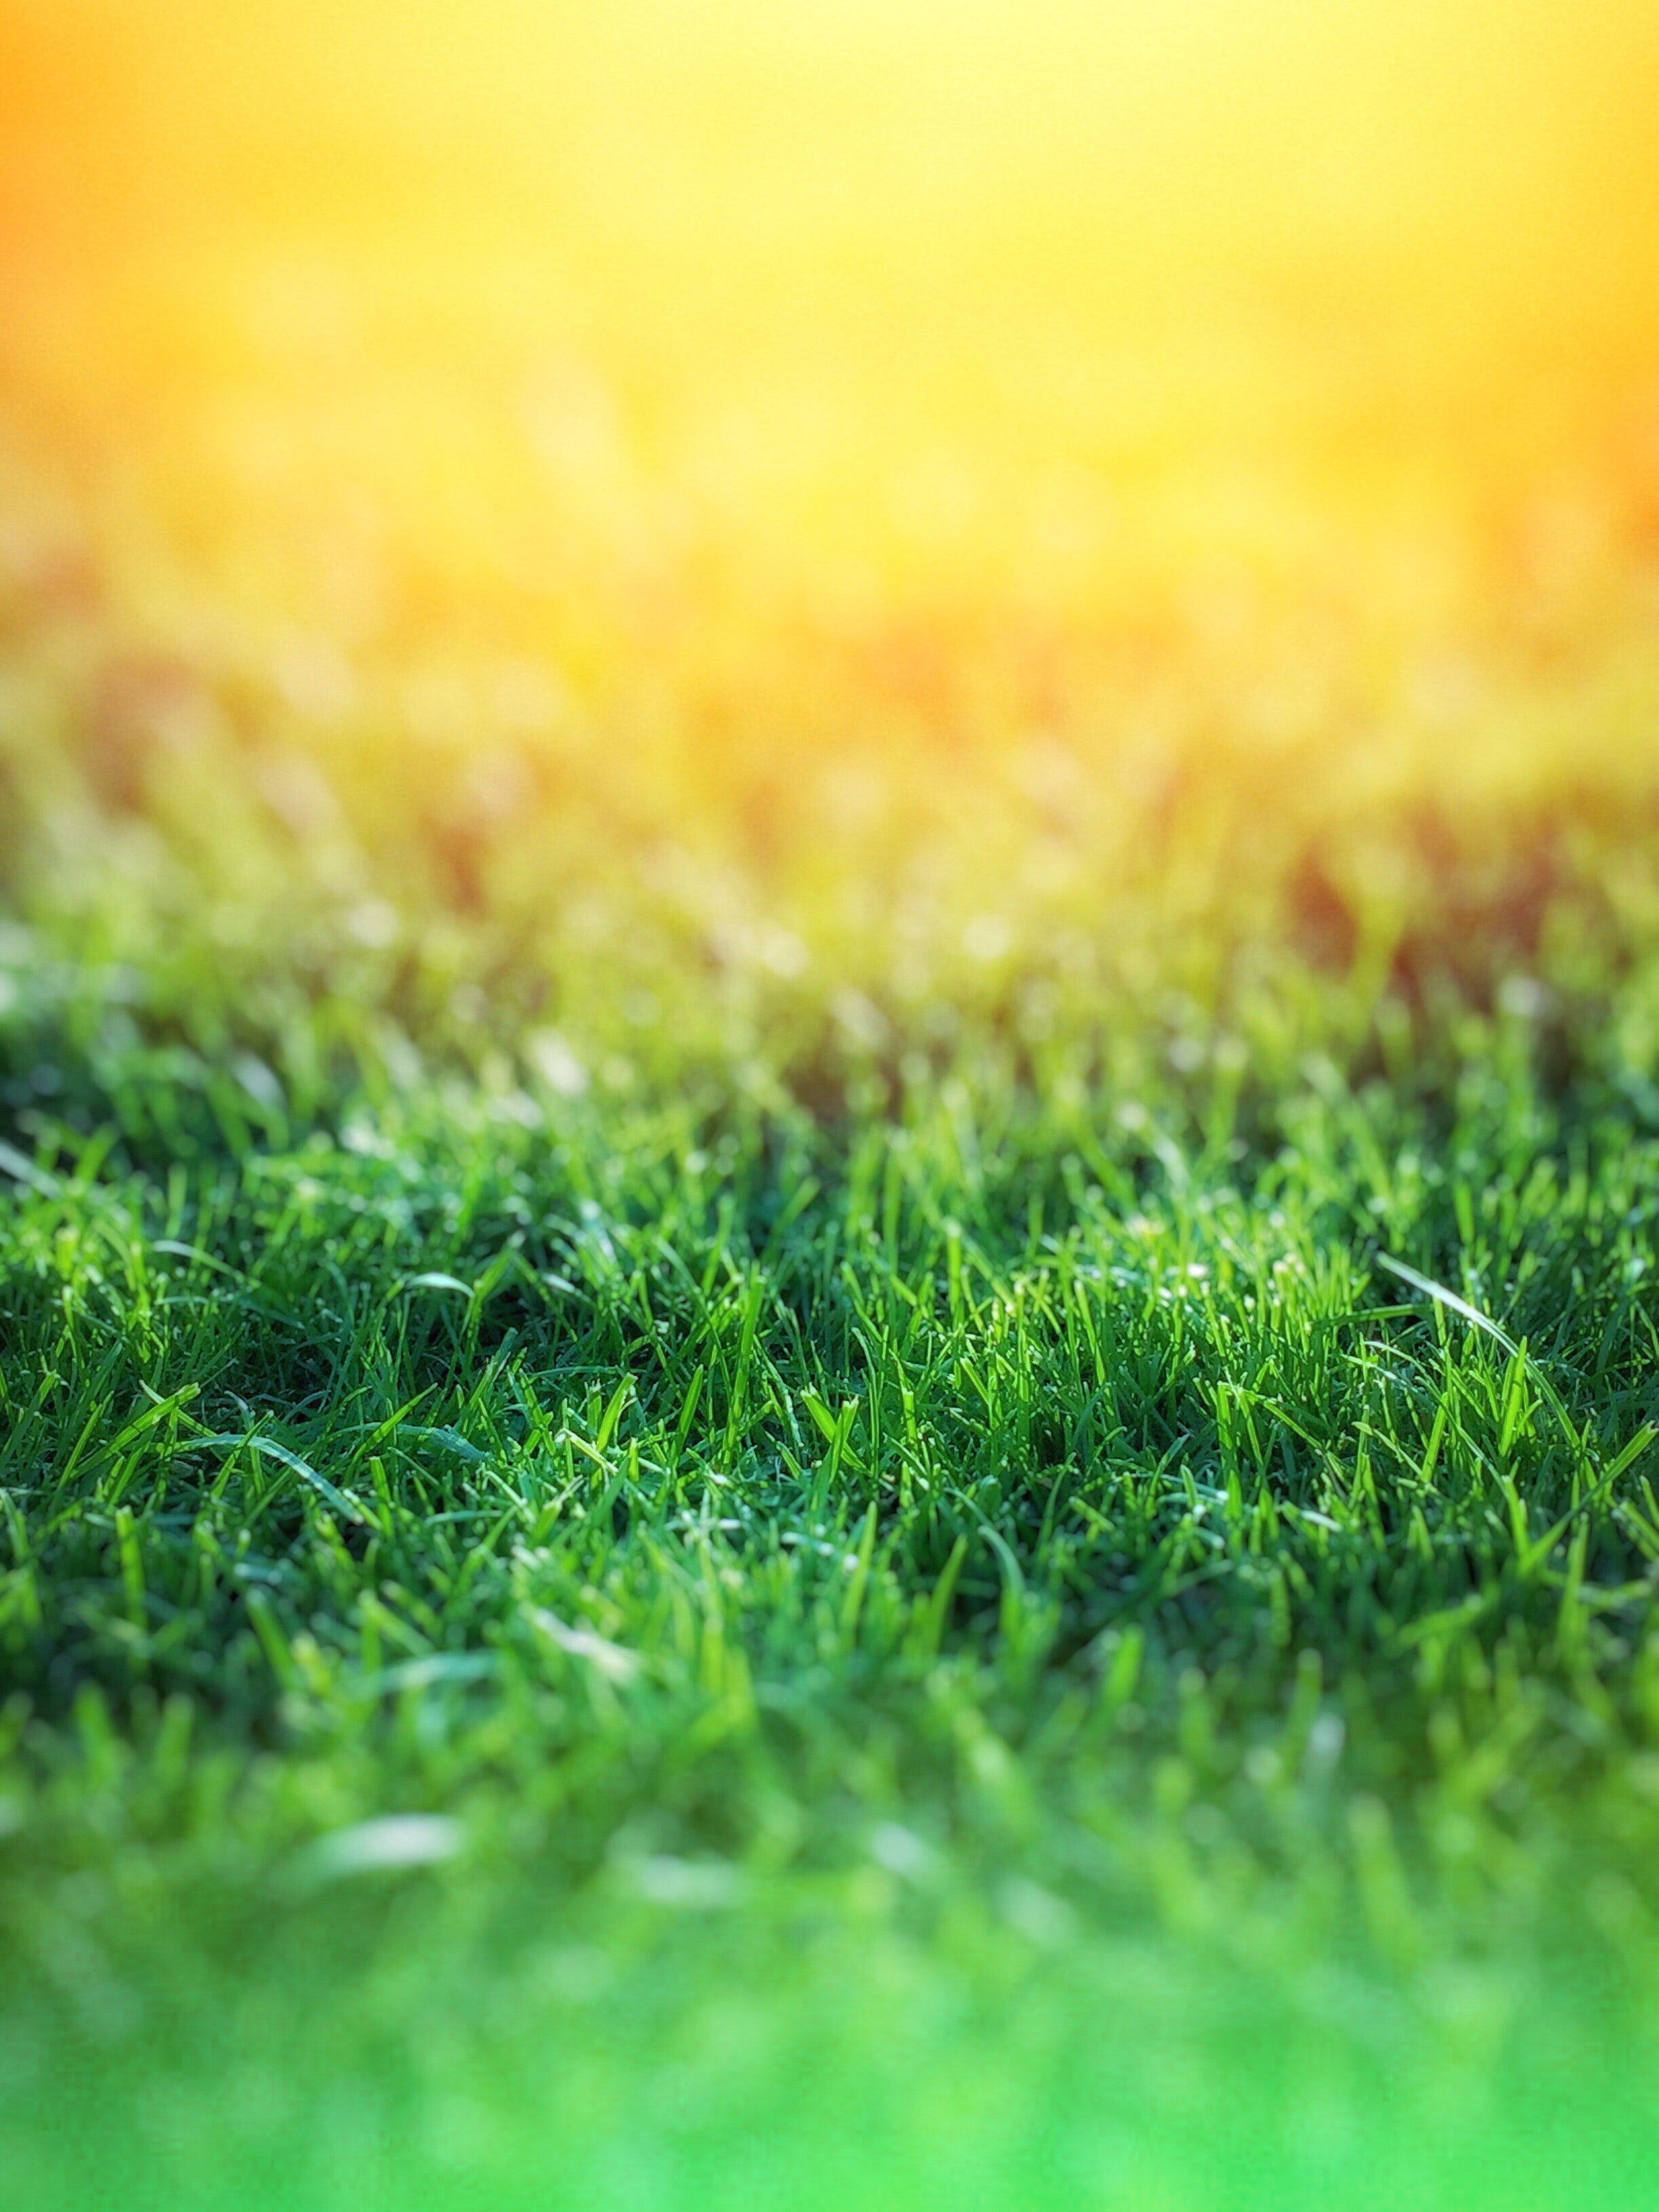 Green grass over yellow background photo